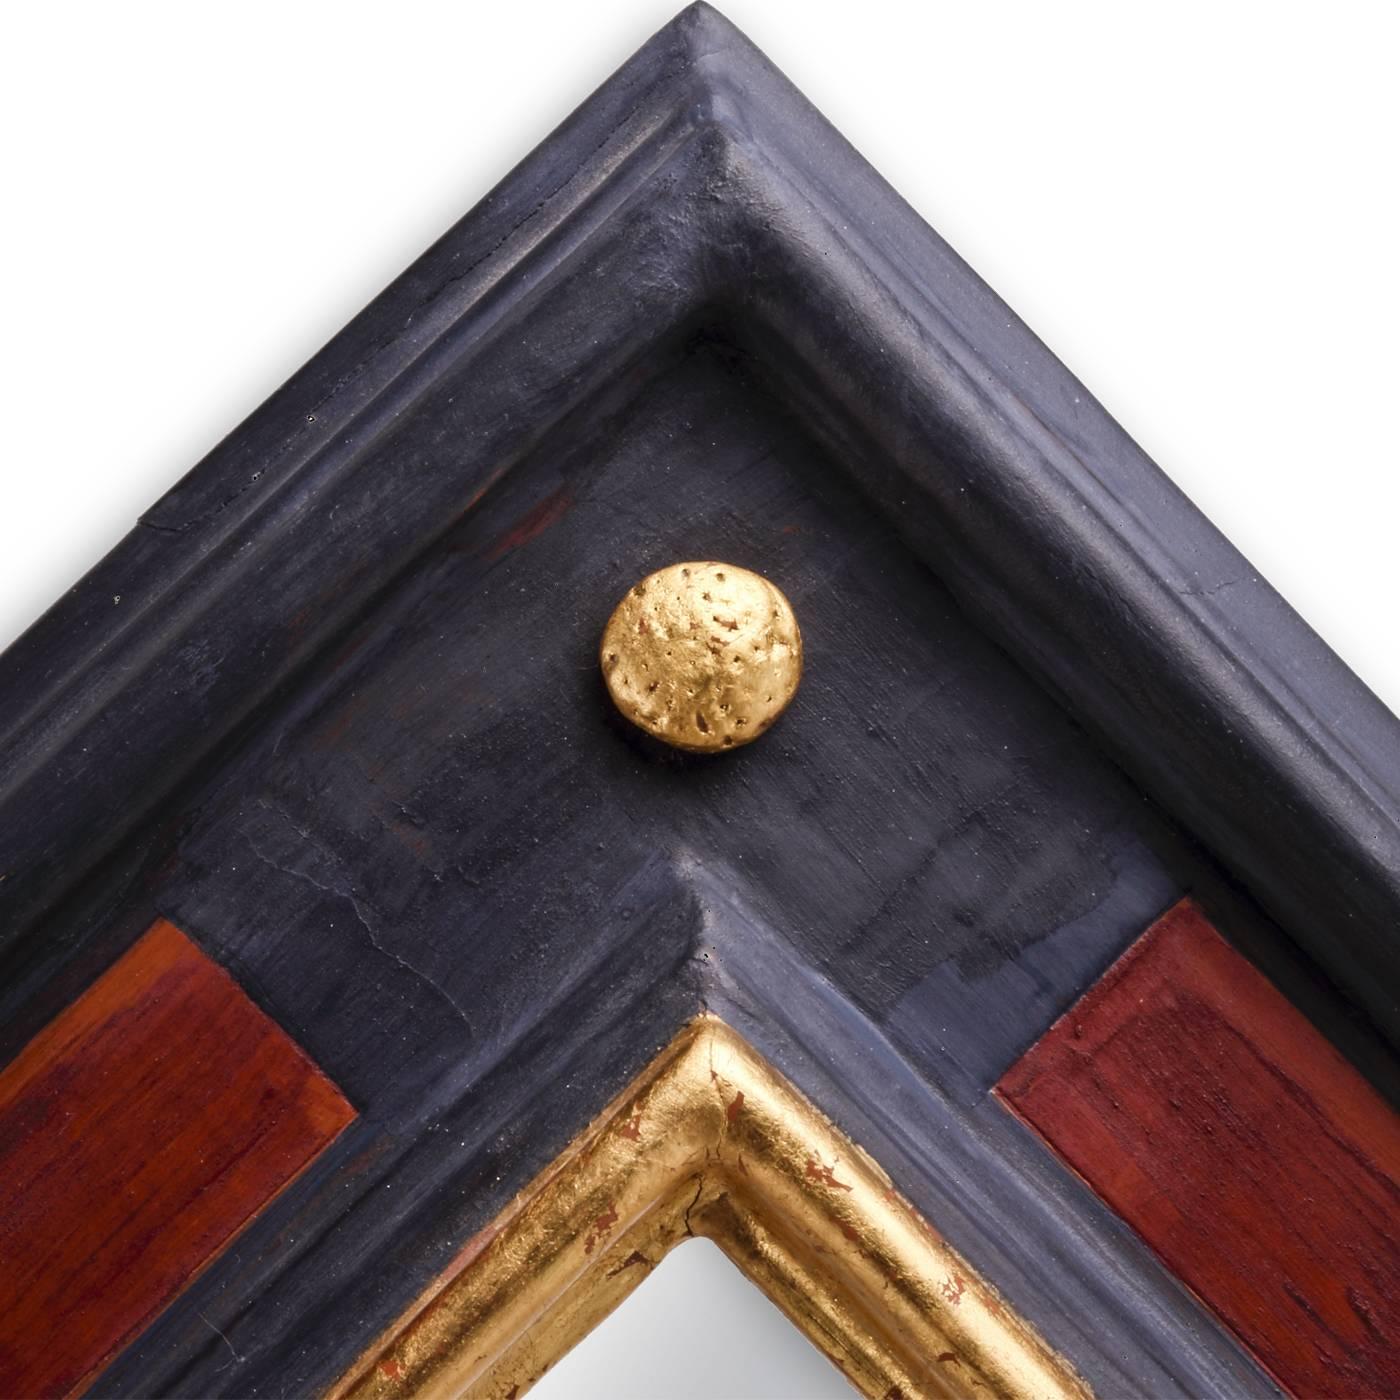 Modern and sophisticated, this mirror was made by hand using reclaimed wood and hand lacquered with a deep shade of blue highlighted with accents in dark red and adorned with buttons on its four corners. The buttons are finished with pure gold leaf